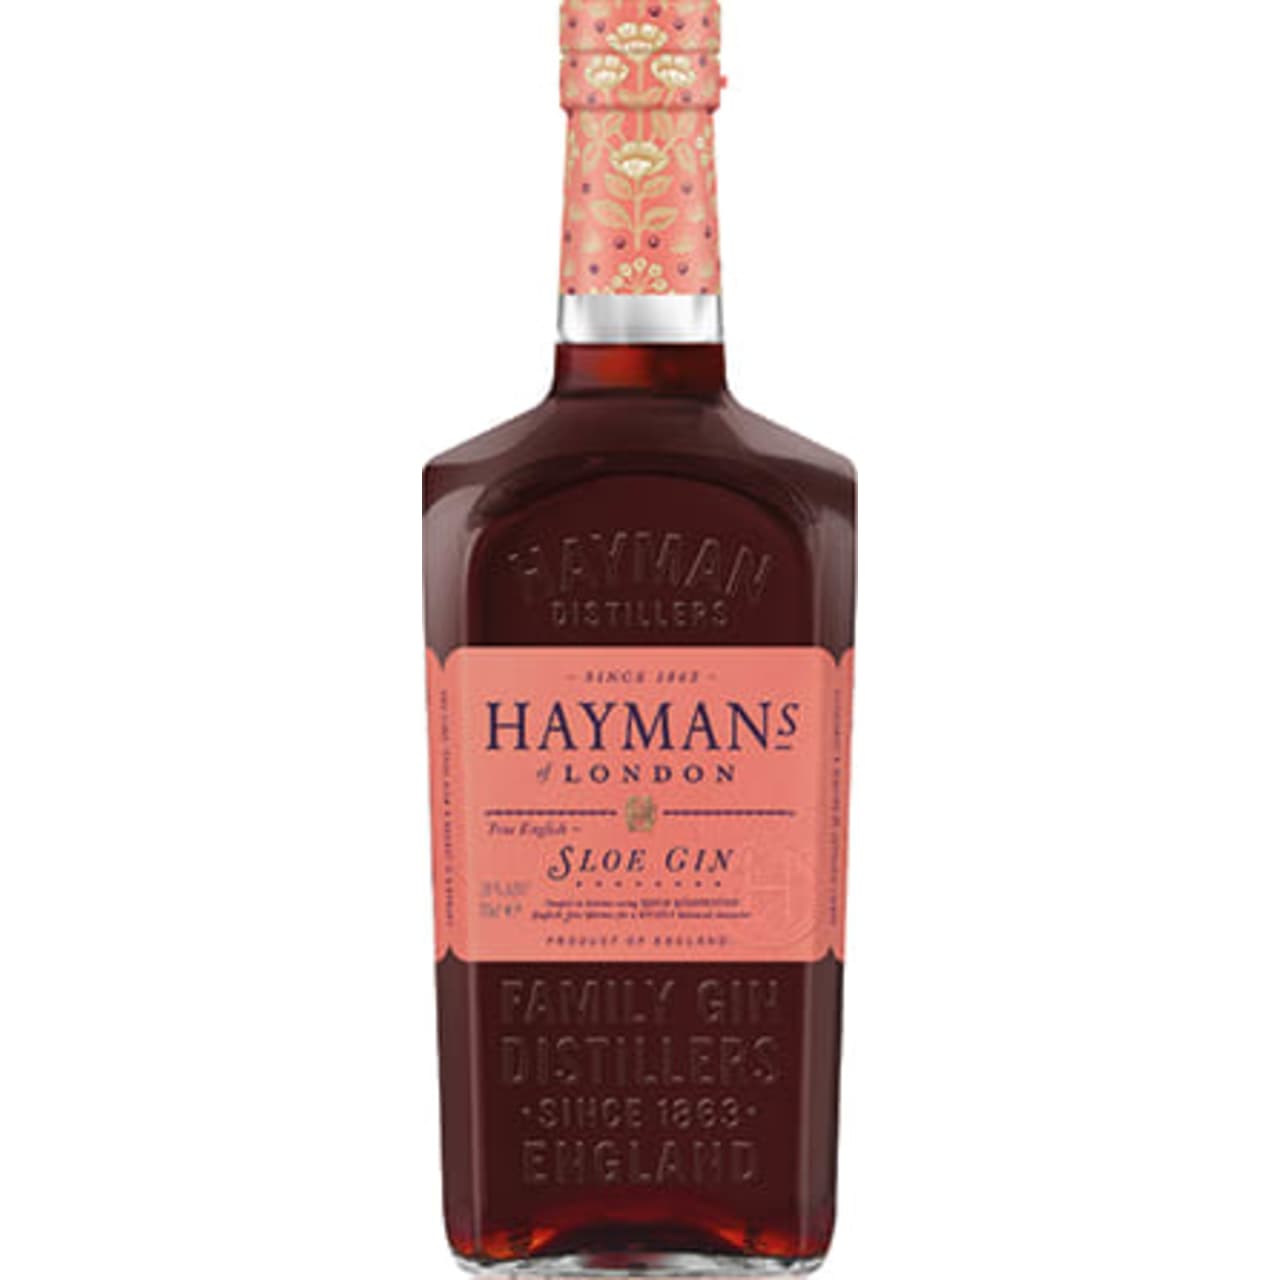 Packed full with delicious hedgerow sloe berries, Hayman's Sloe Gin is a traditional English Liqueur, rich in berry taste with an almond hint.